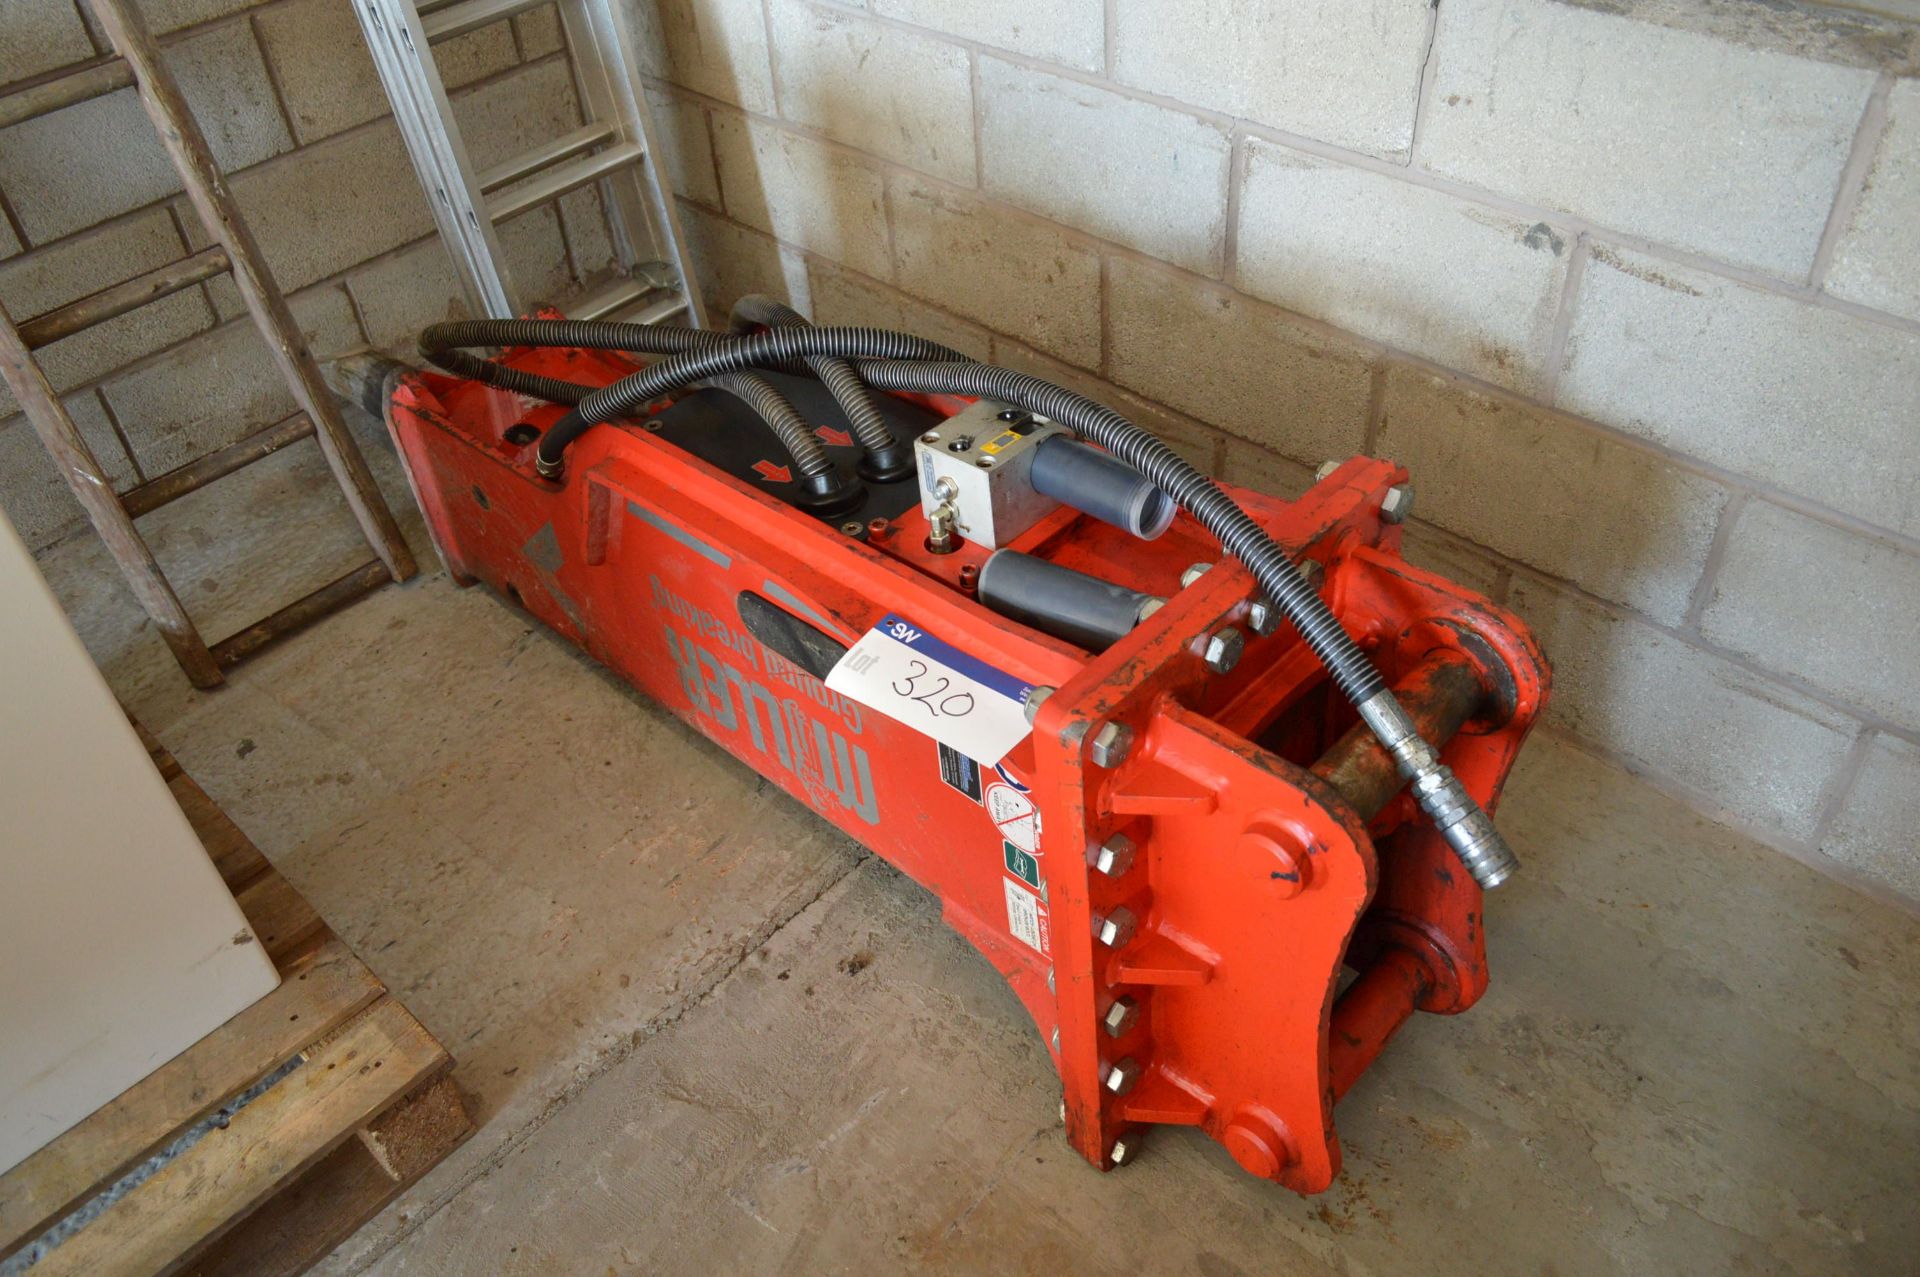 Miller MGB0900 HYDRAULIC HAMMER/ BREAKER, serial no. MGB090000008, year of manufacture 2014